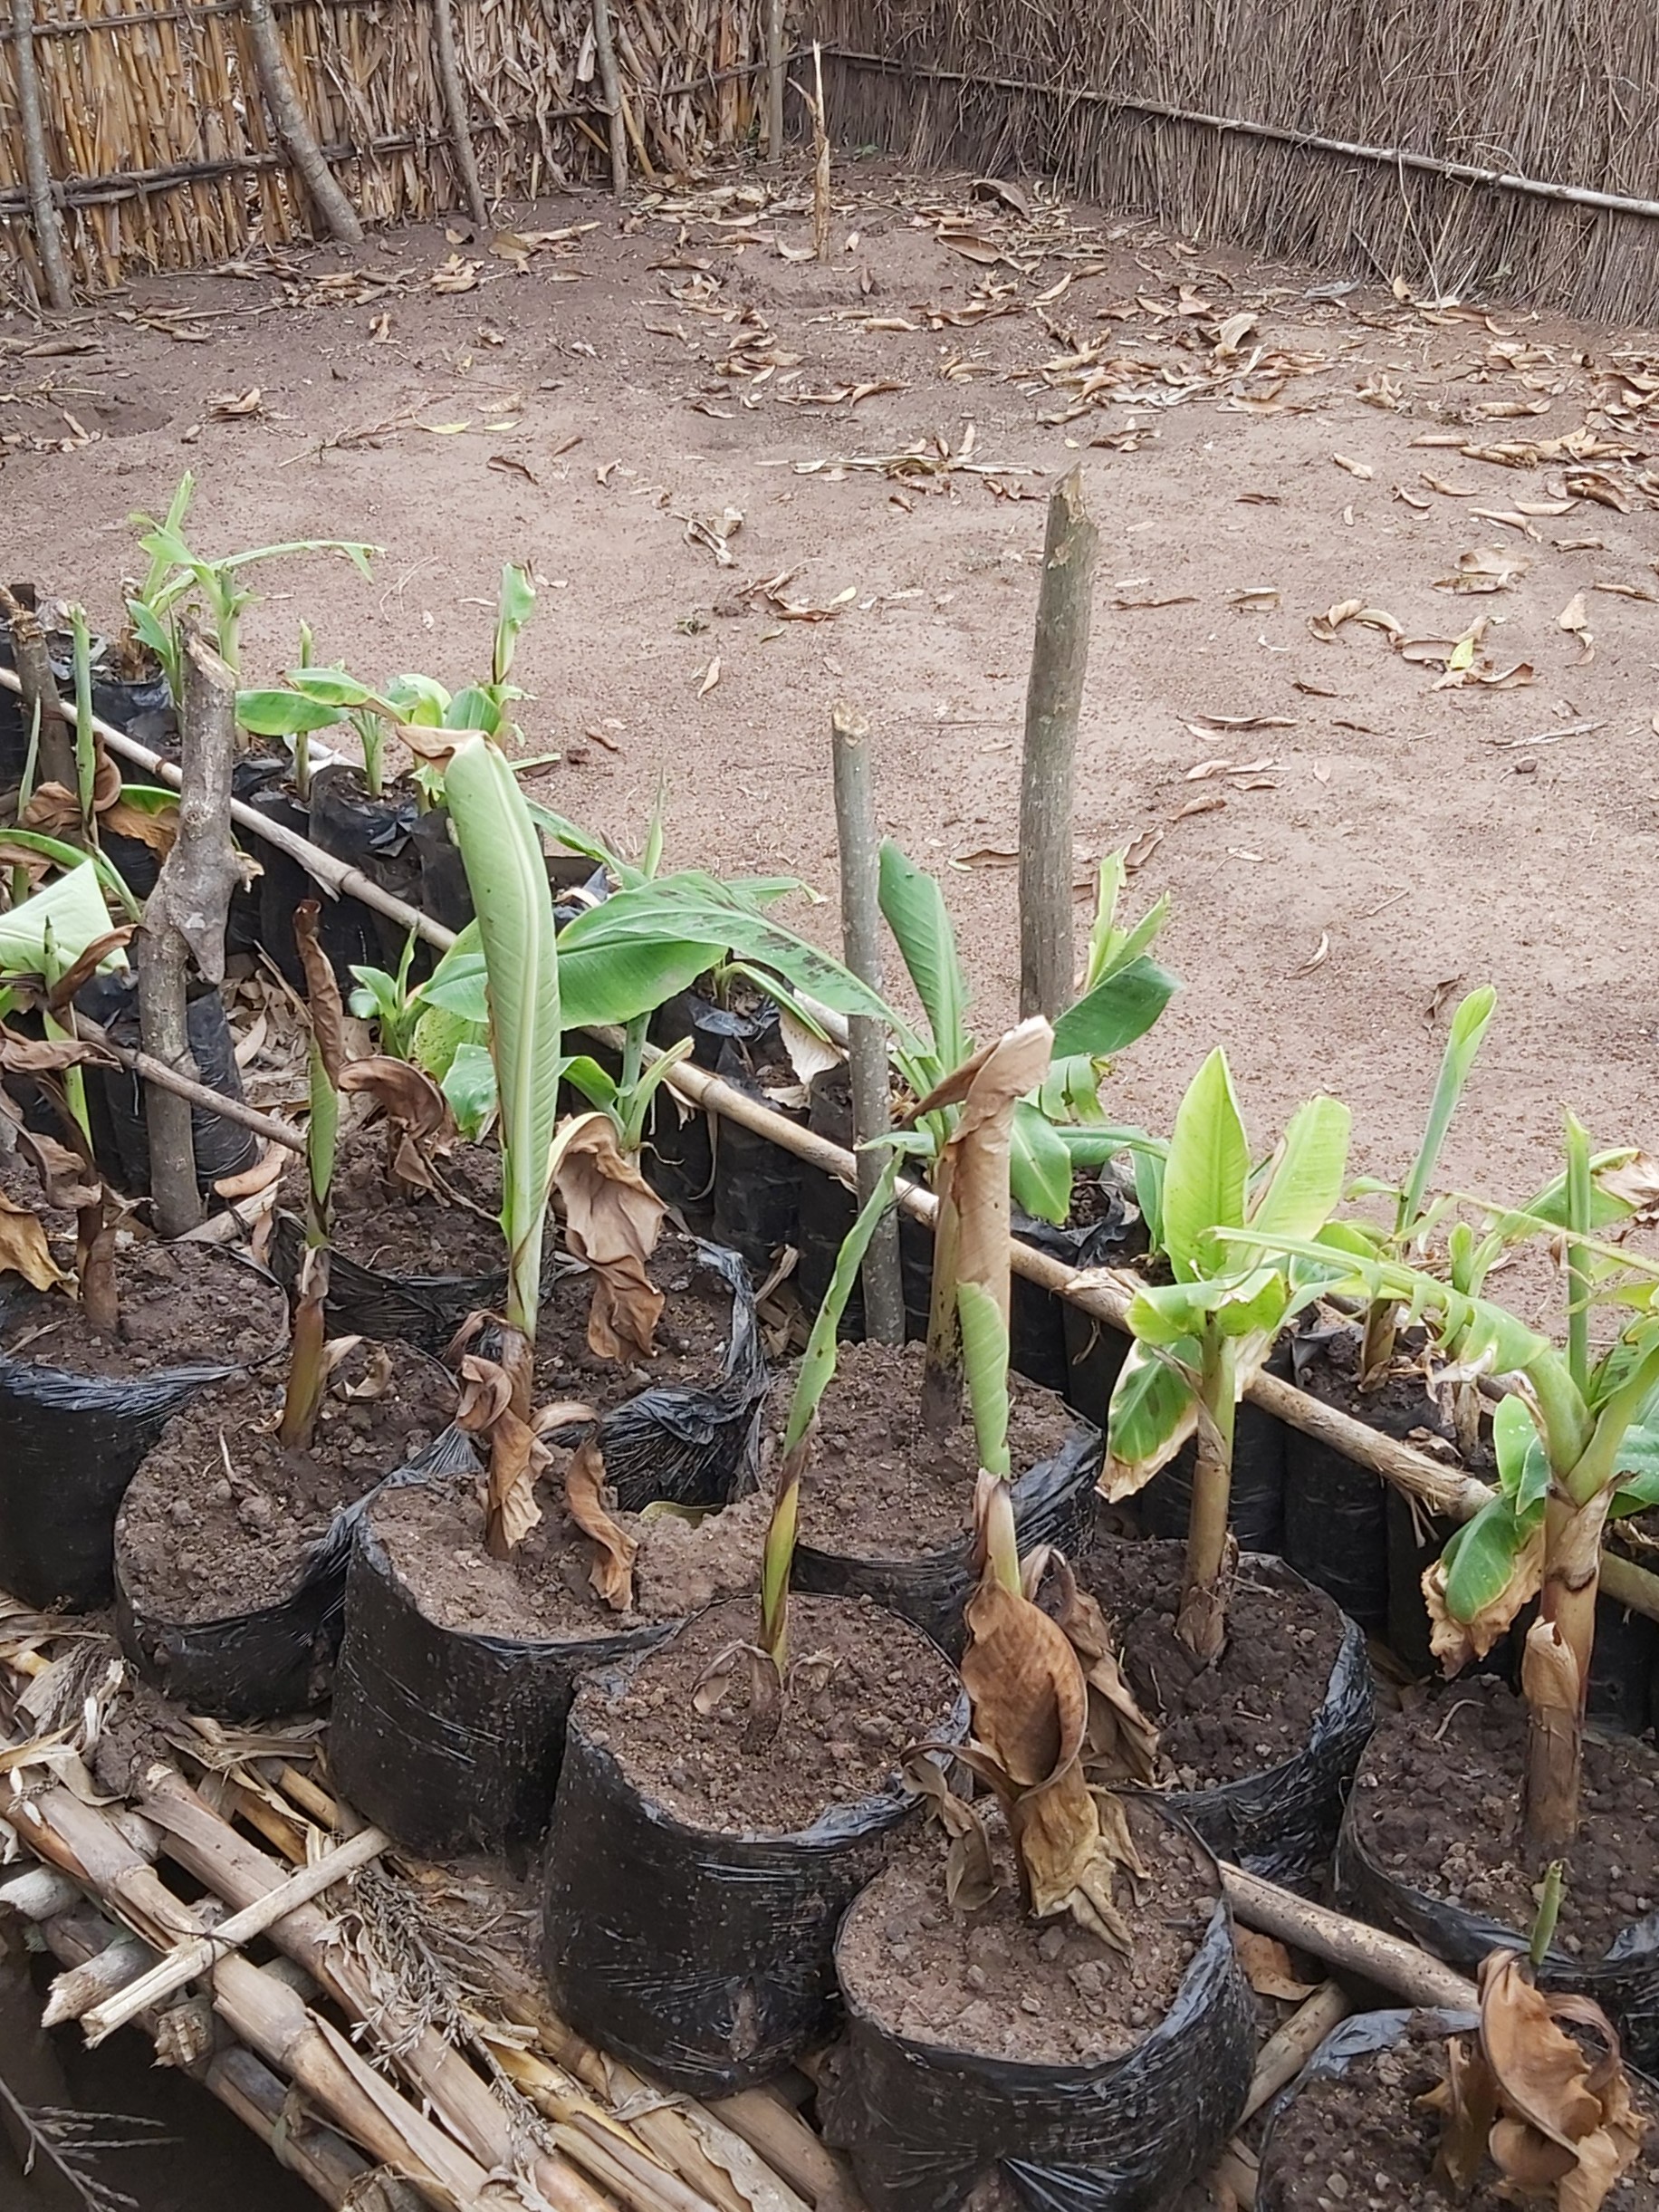 Banana seedlings in pots waiting to be planted where the implementer conducted activities.